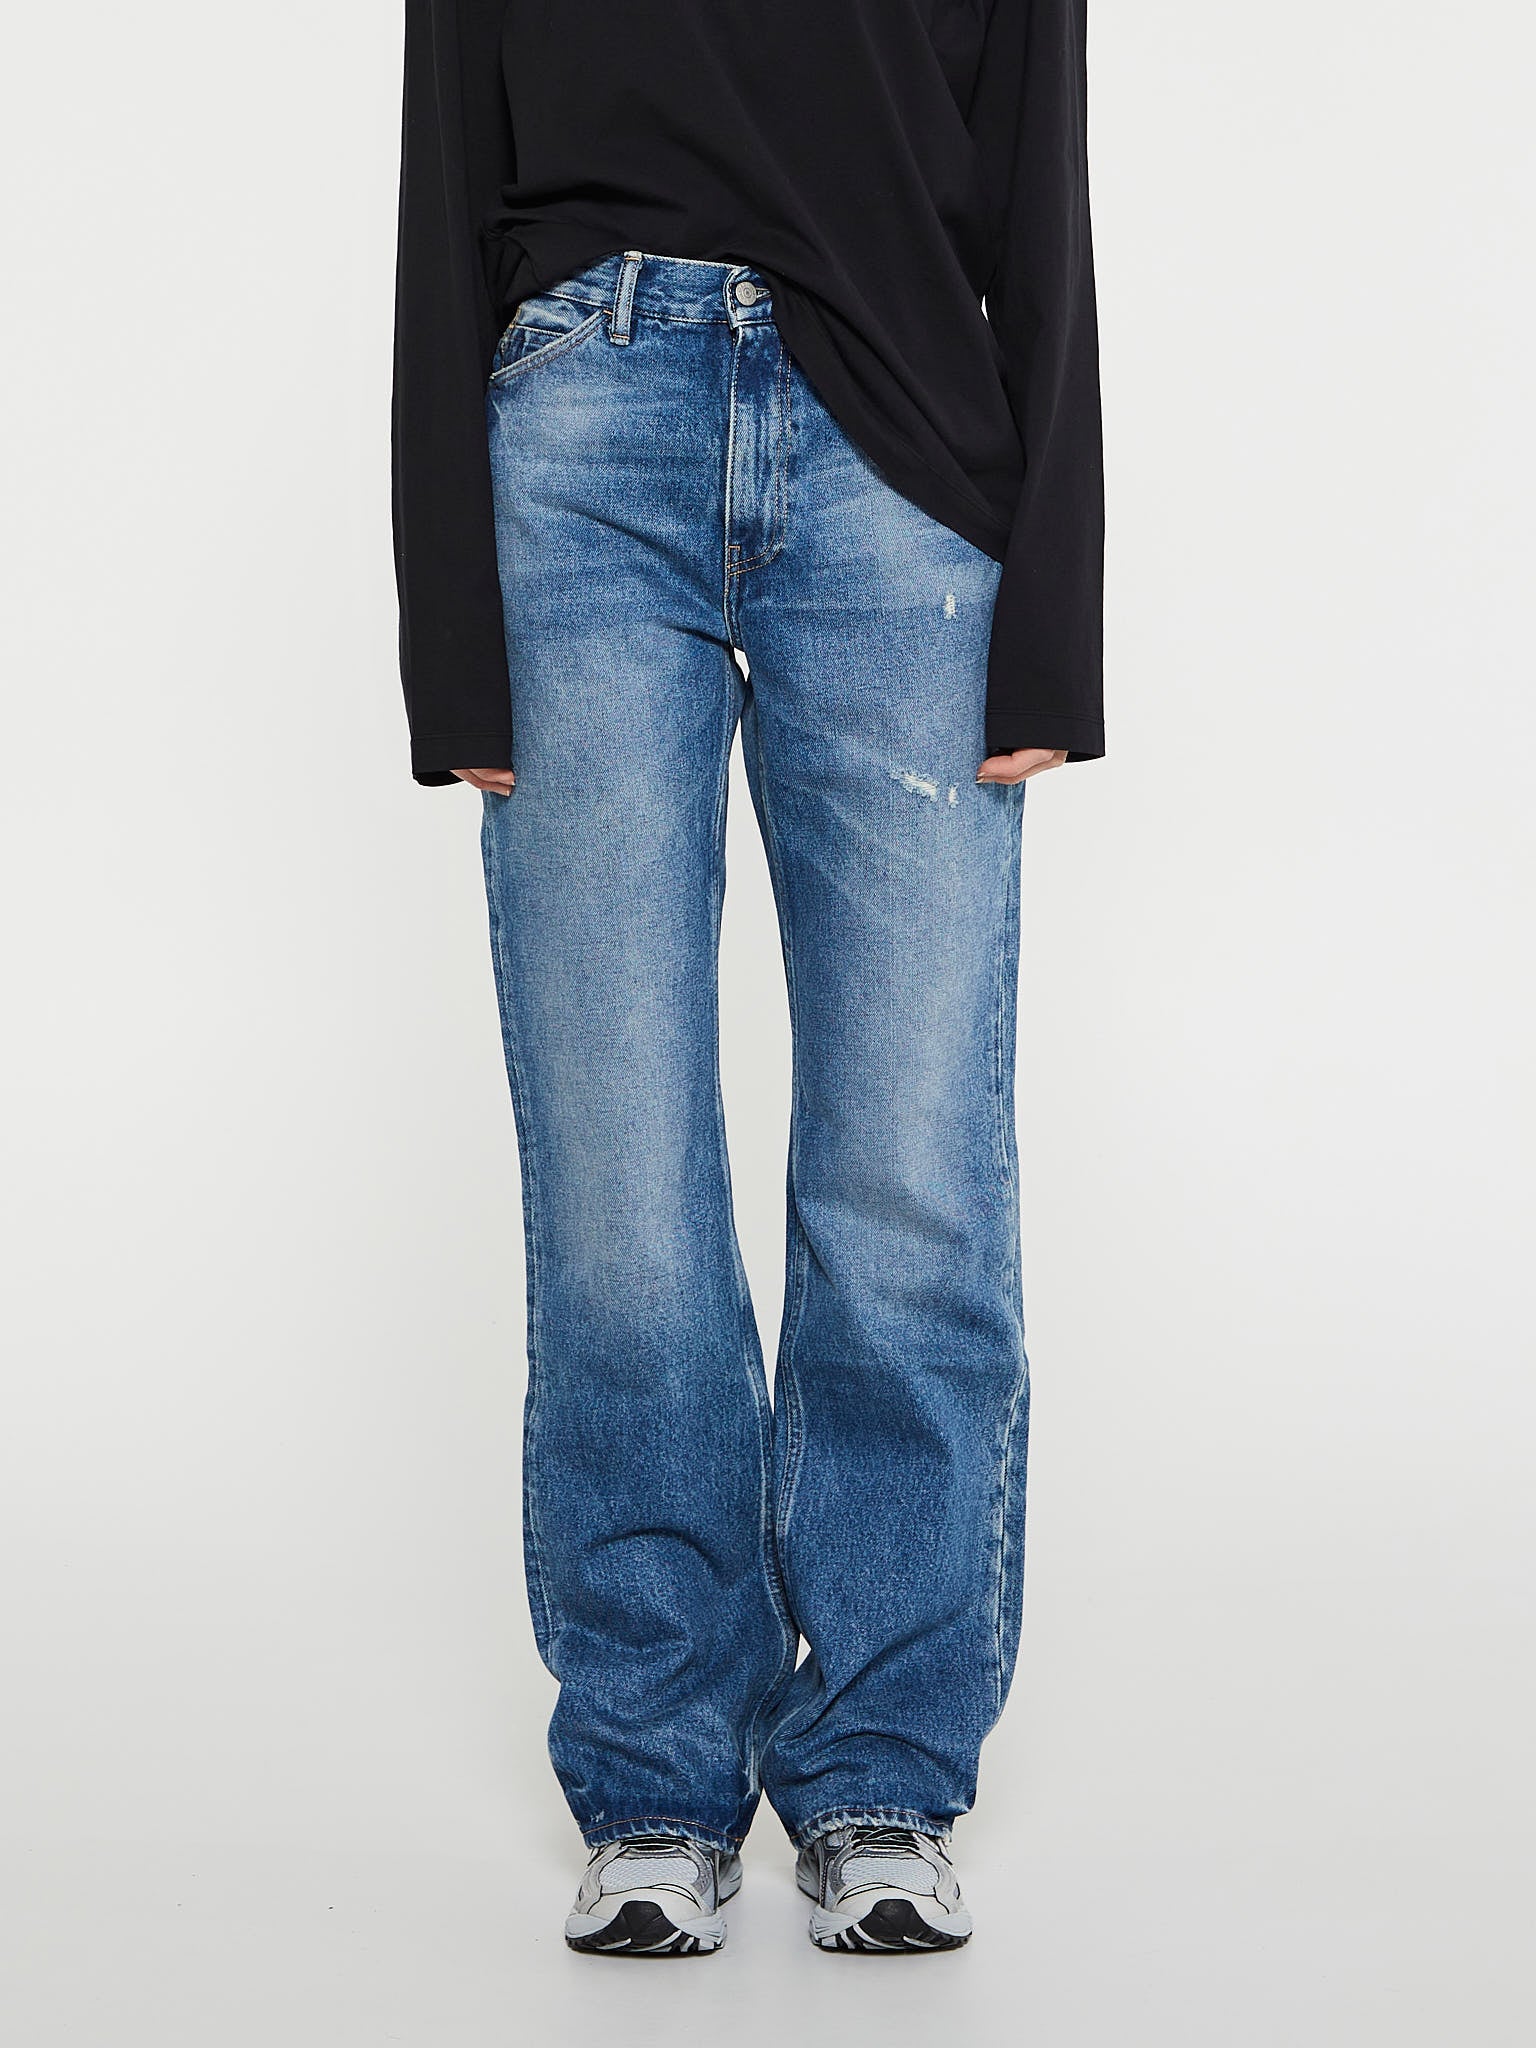 Jeans for women  See women's jeans at stoy